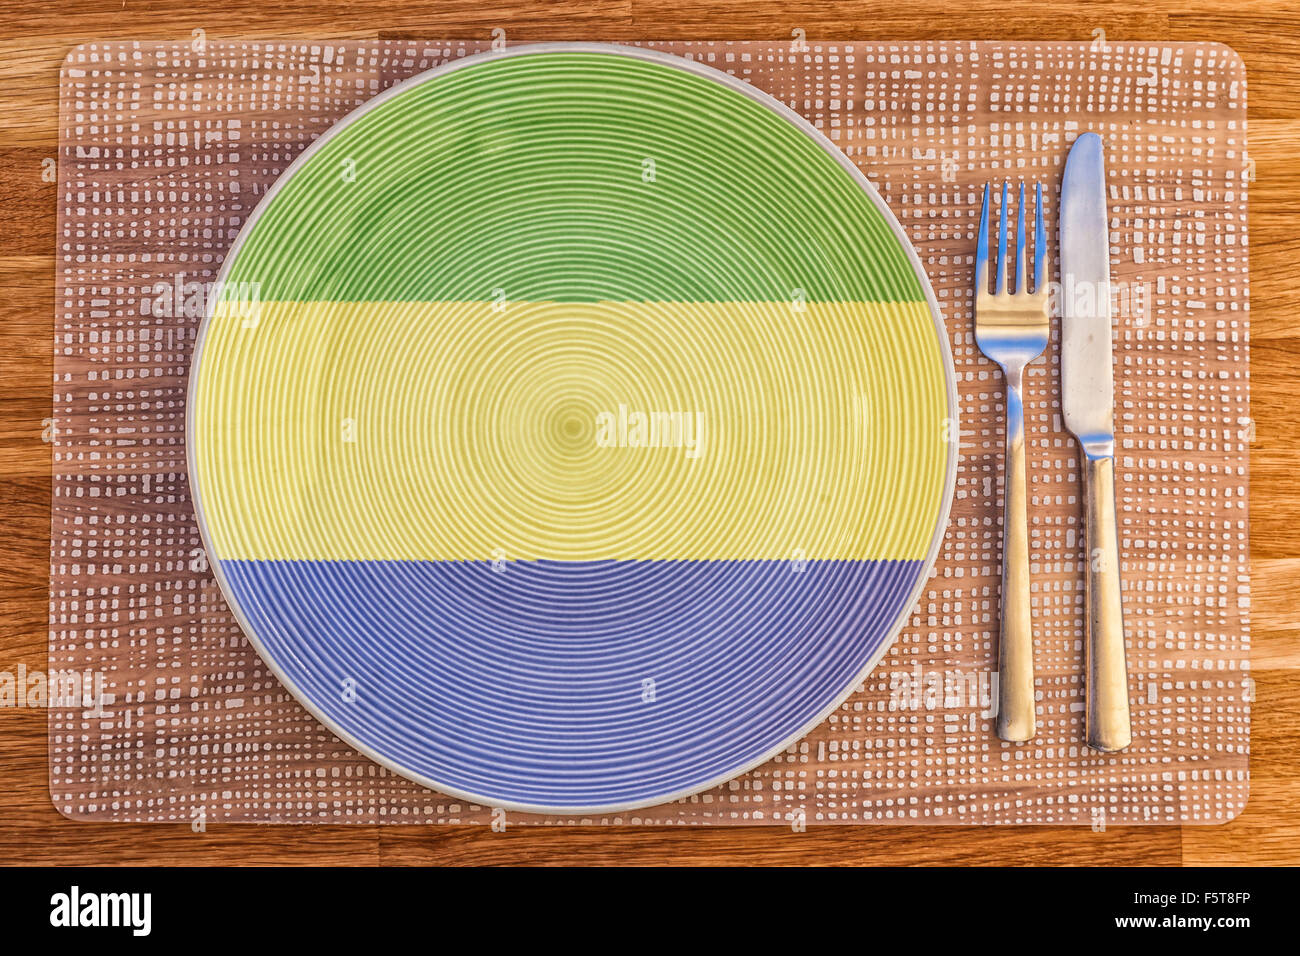 Dinner plate with the flag of Gabon on it for your international food and drink concepts. Stock Photo